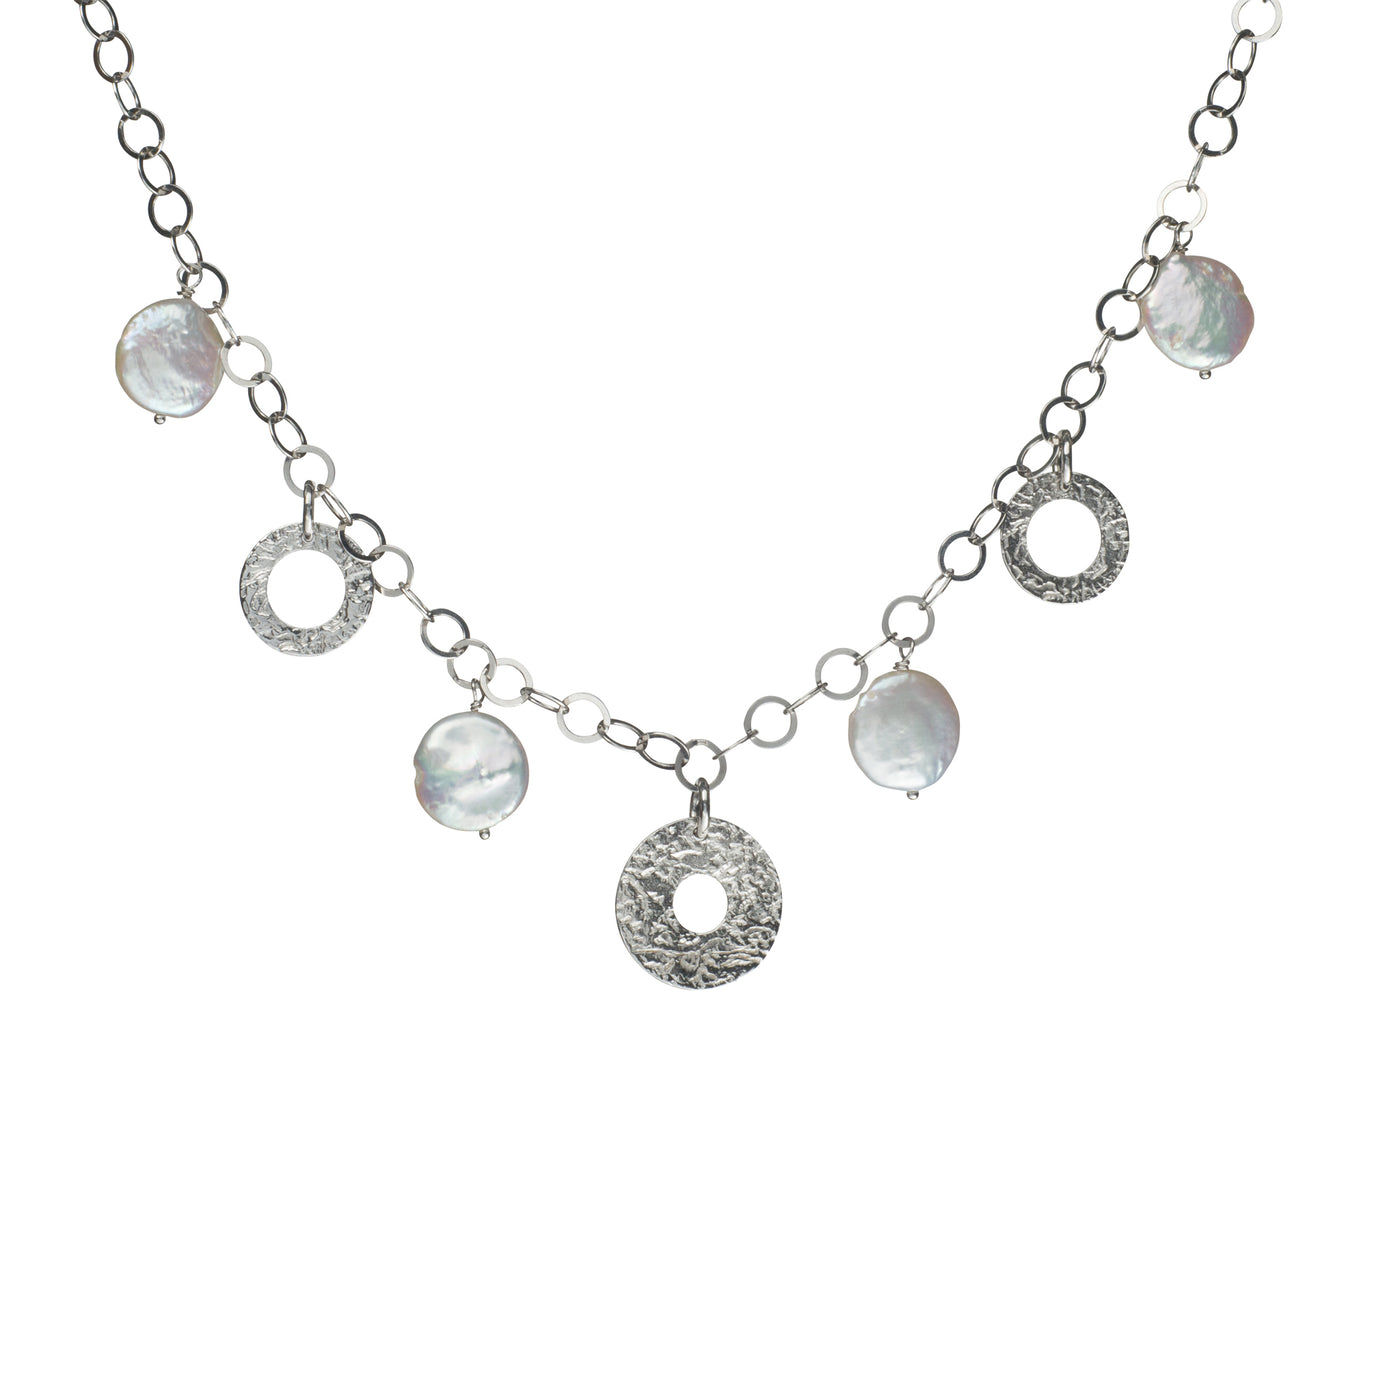 Western Coin Pearl Necklace